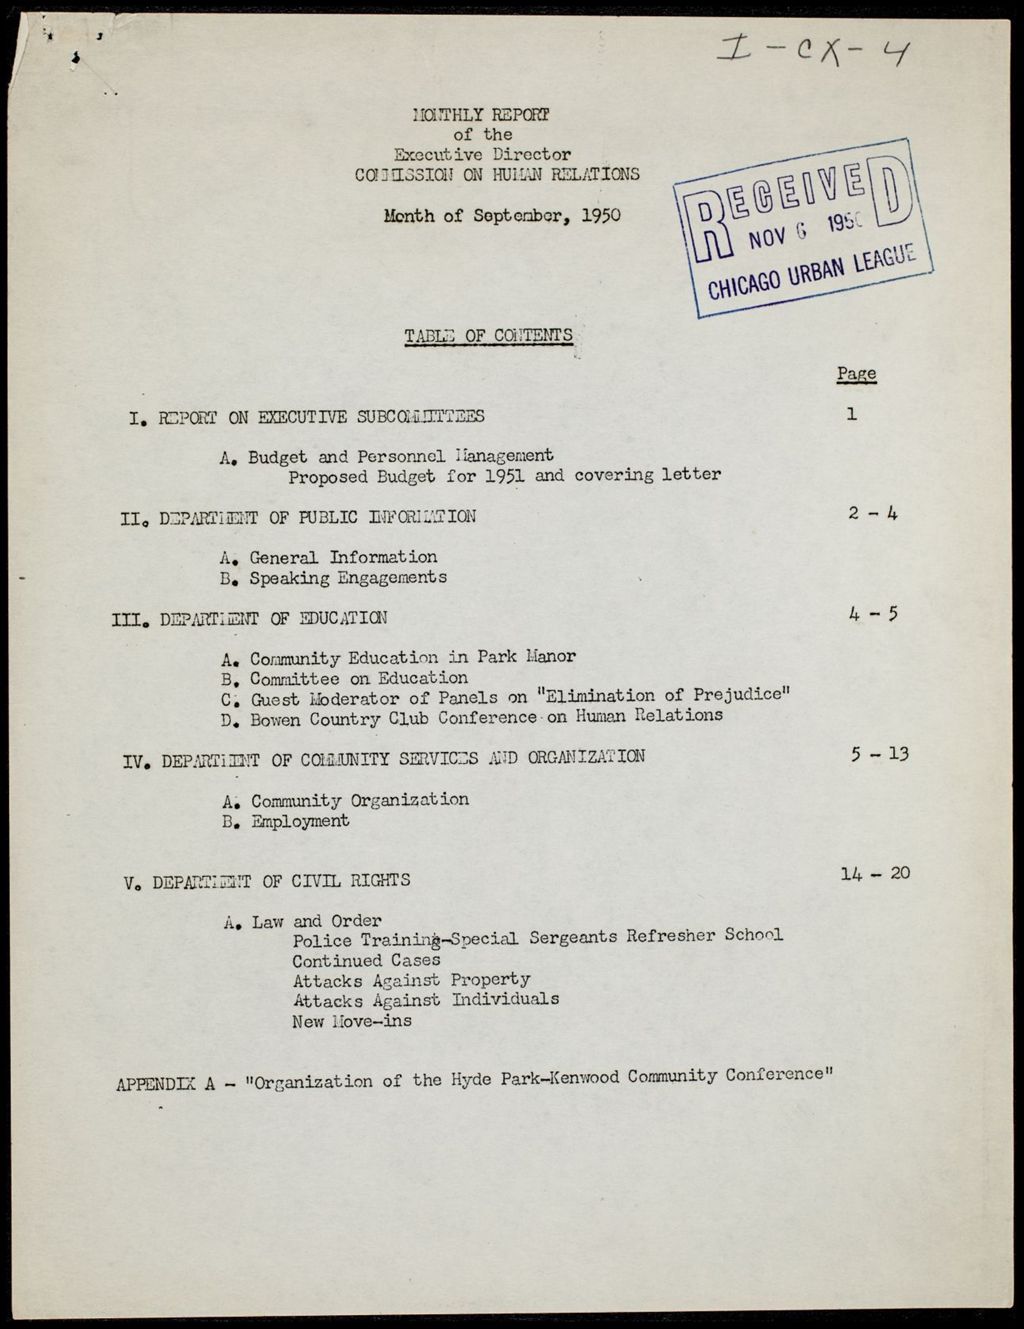 Miniature of Chicago Commission on Human Relations Executive Director reports, 1950 (Folder I-2789)